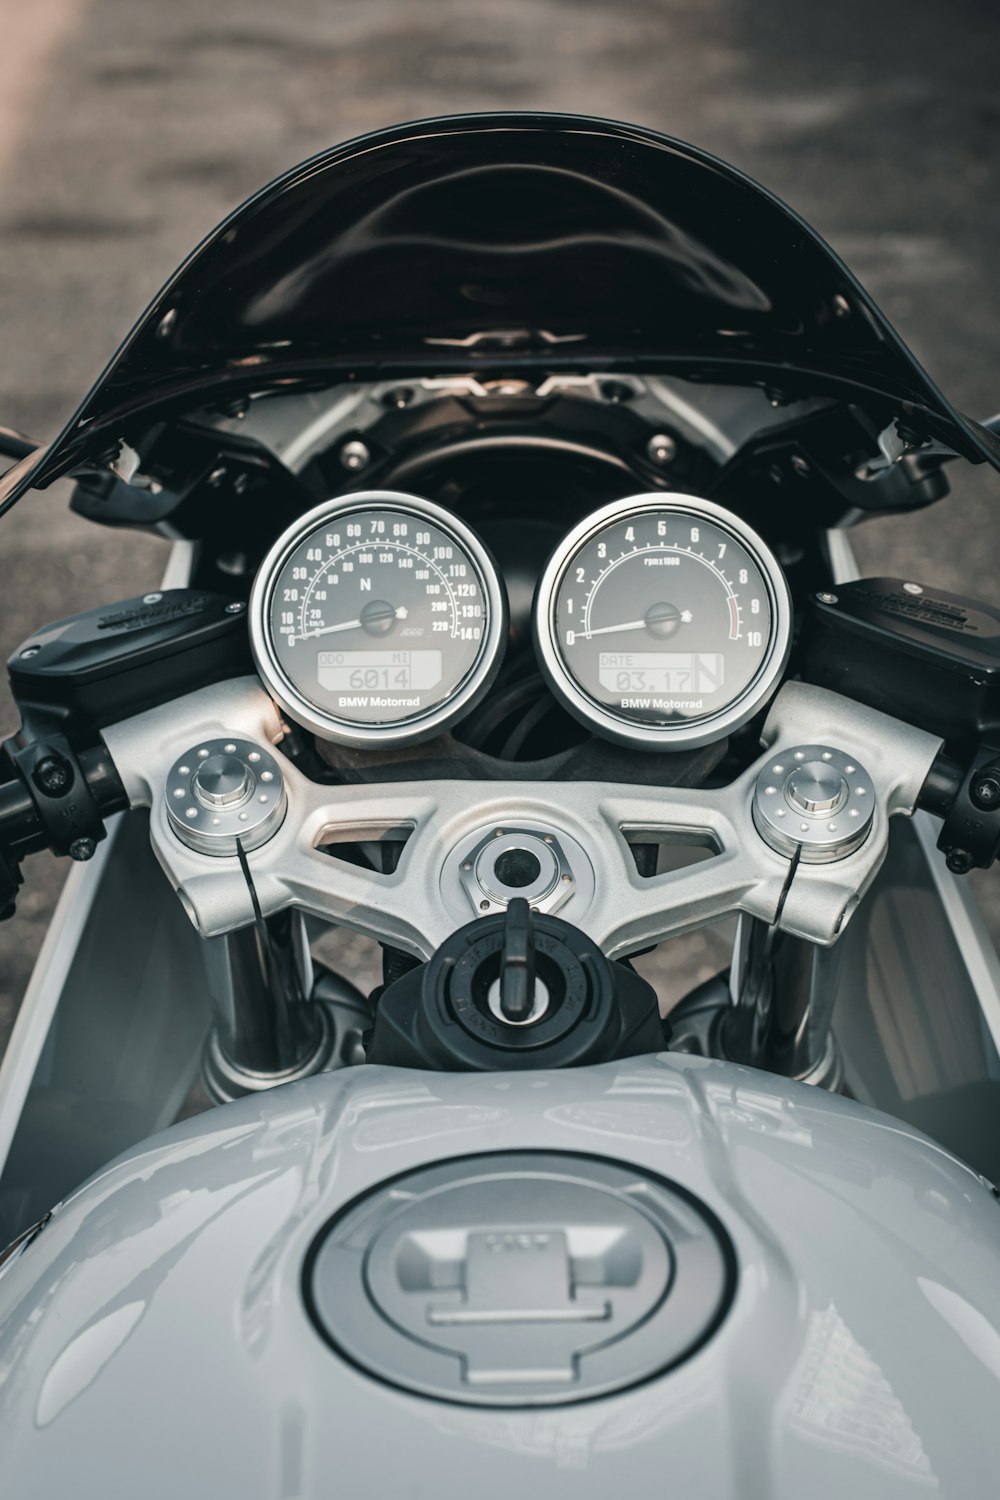 a close up of the gauges on a motorcycle